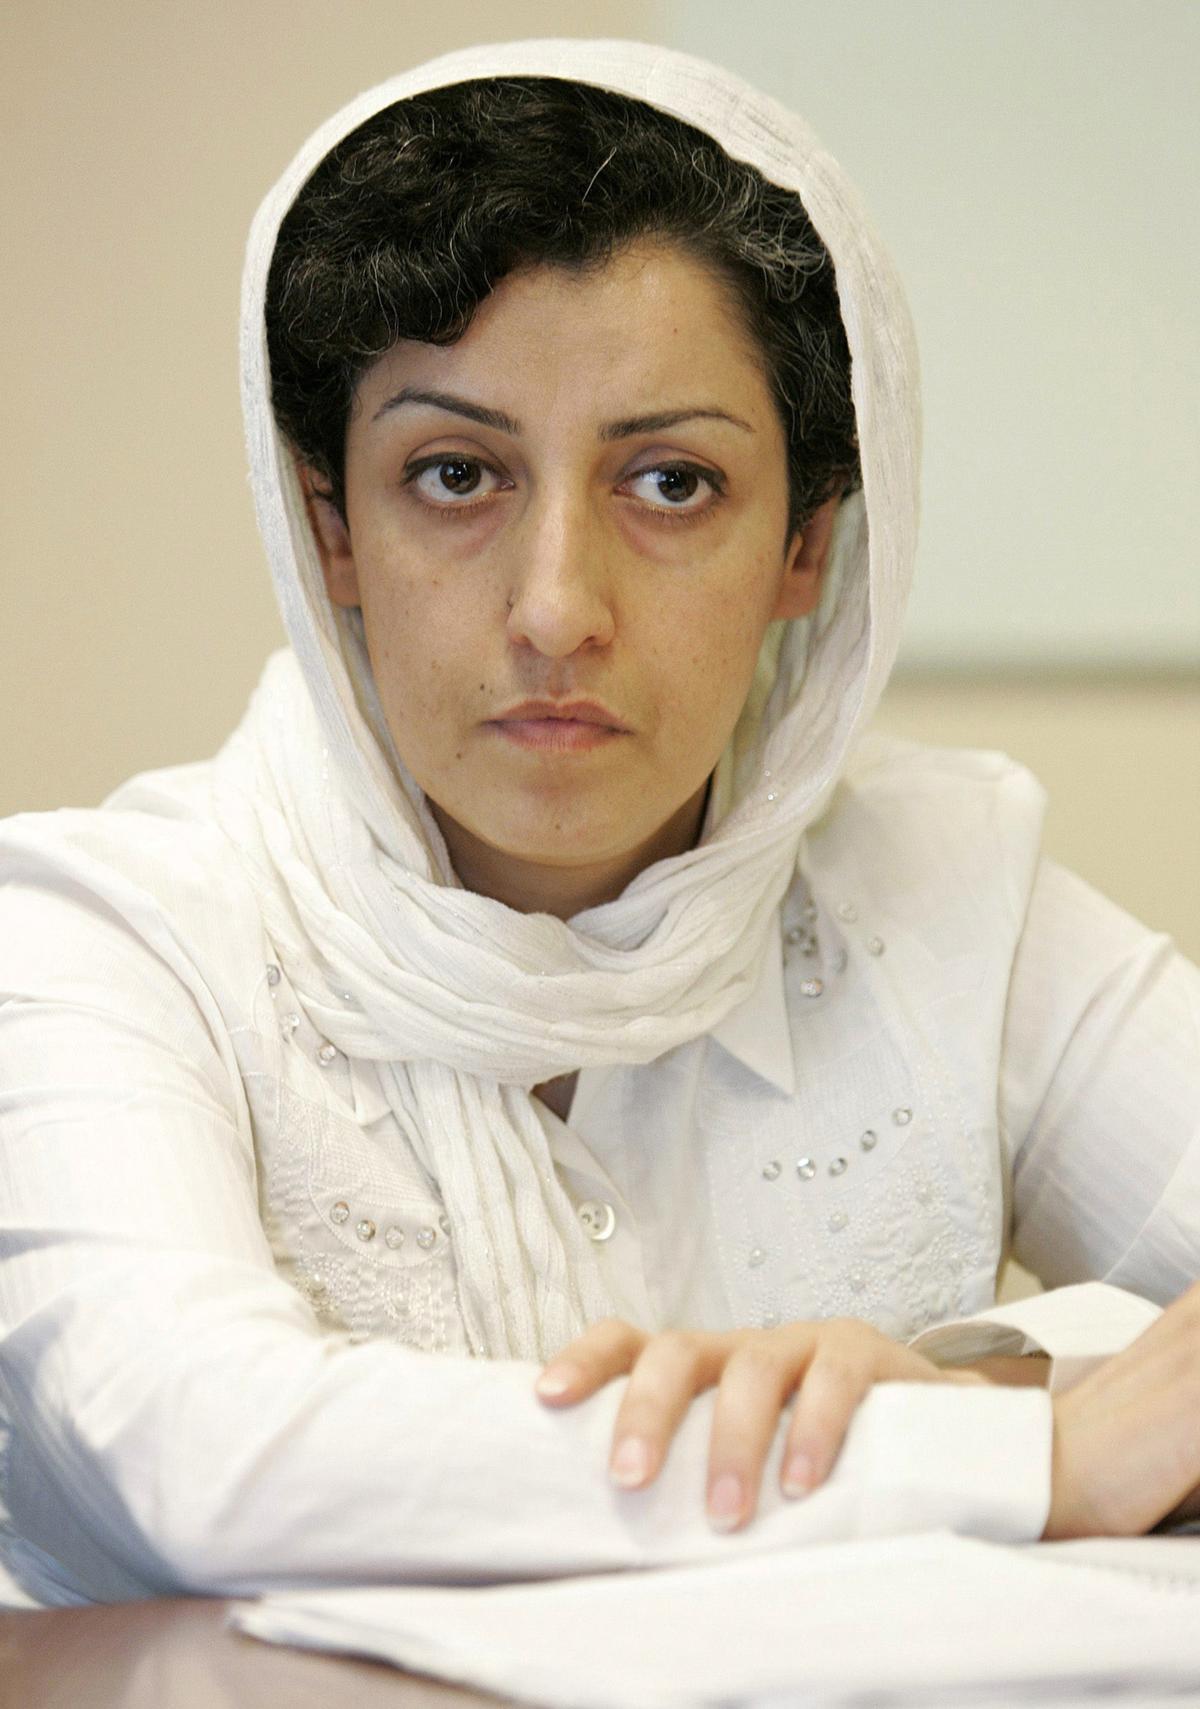 Nobel Peace Prize laureate Narges Mohammadi goes on a hunger strike while imprisoned in Iran